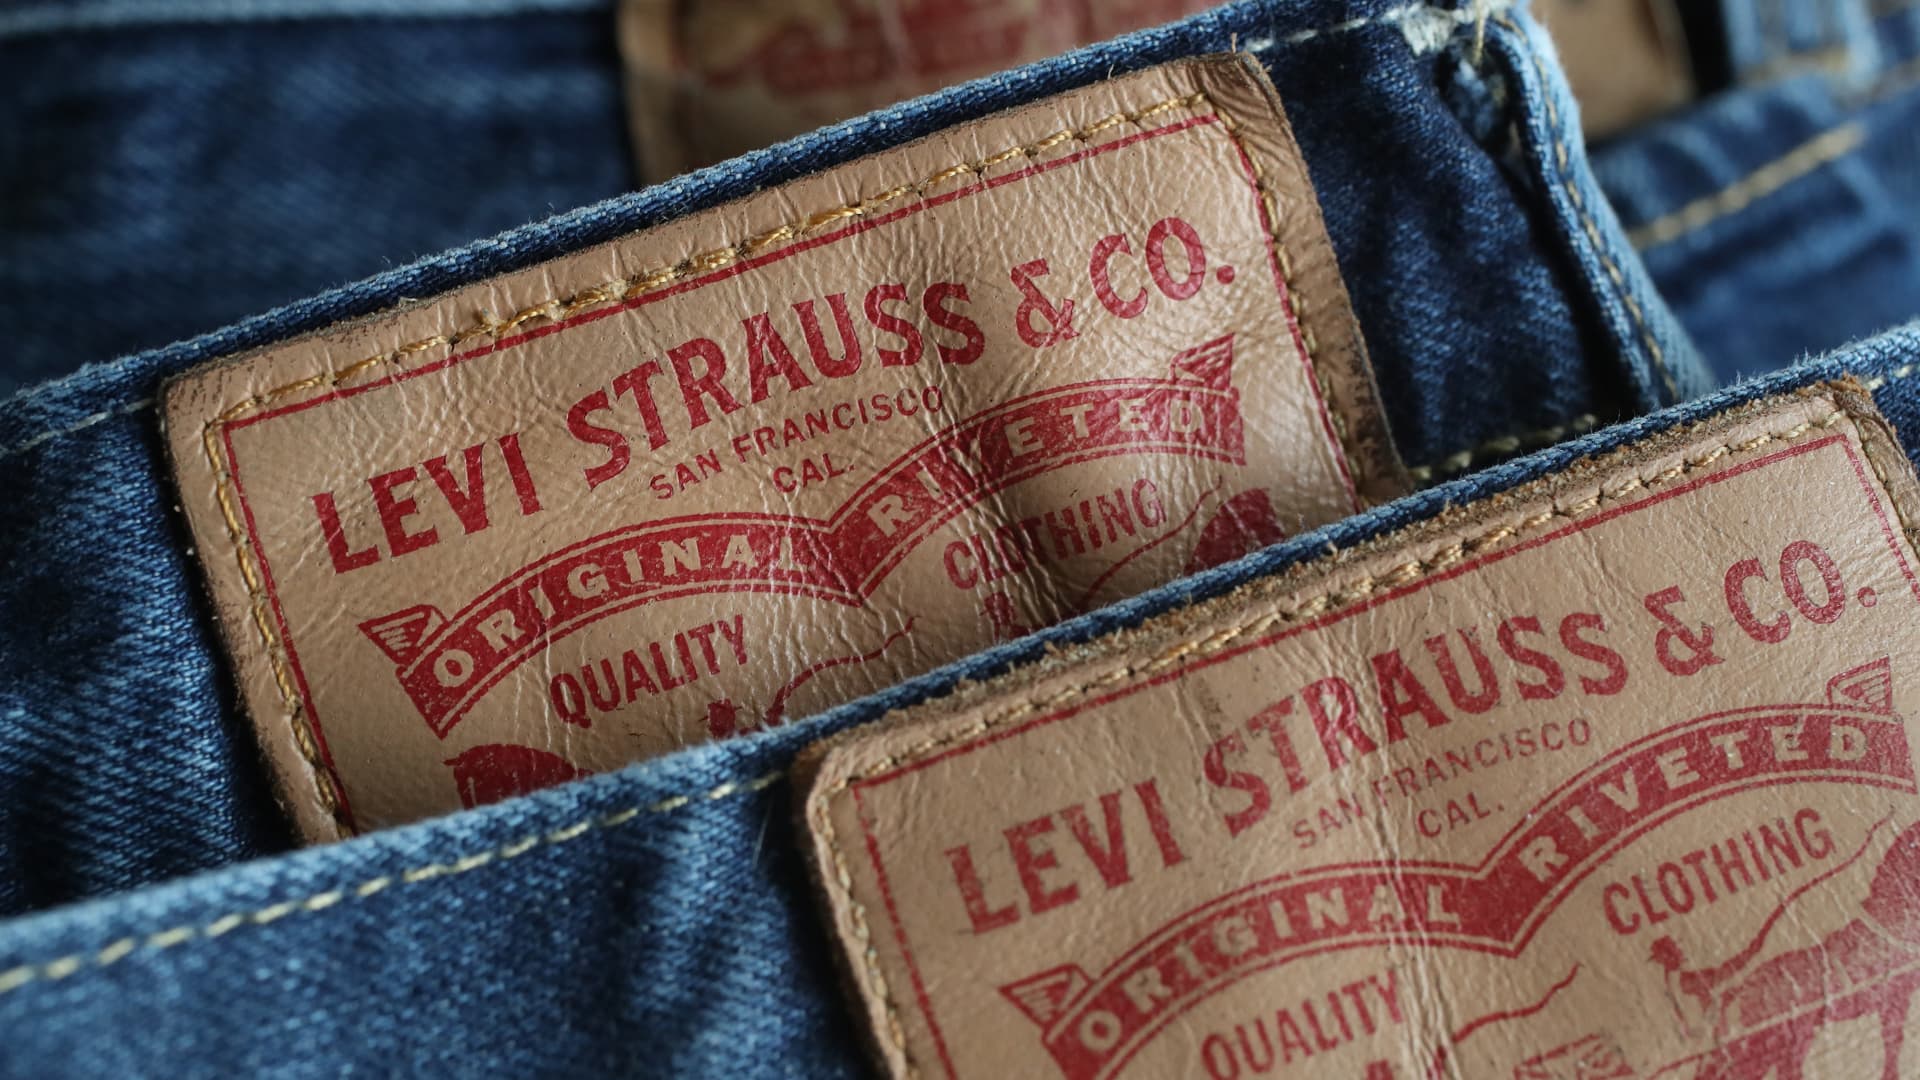 Levi’s CEO says the ‘head-to-toe denim lifestyle’ is seeing success